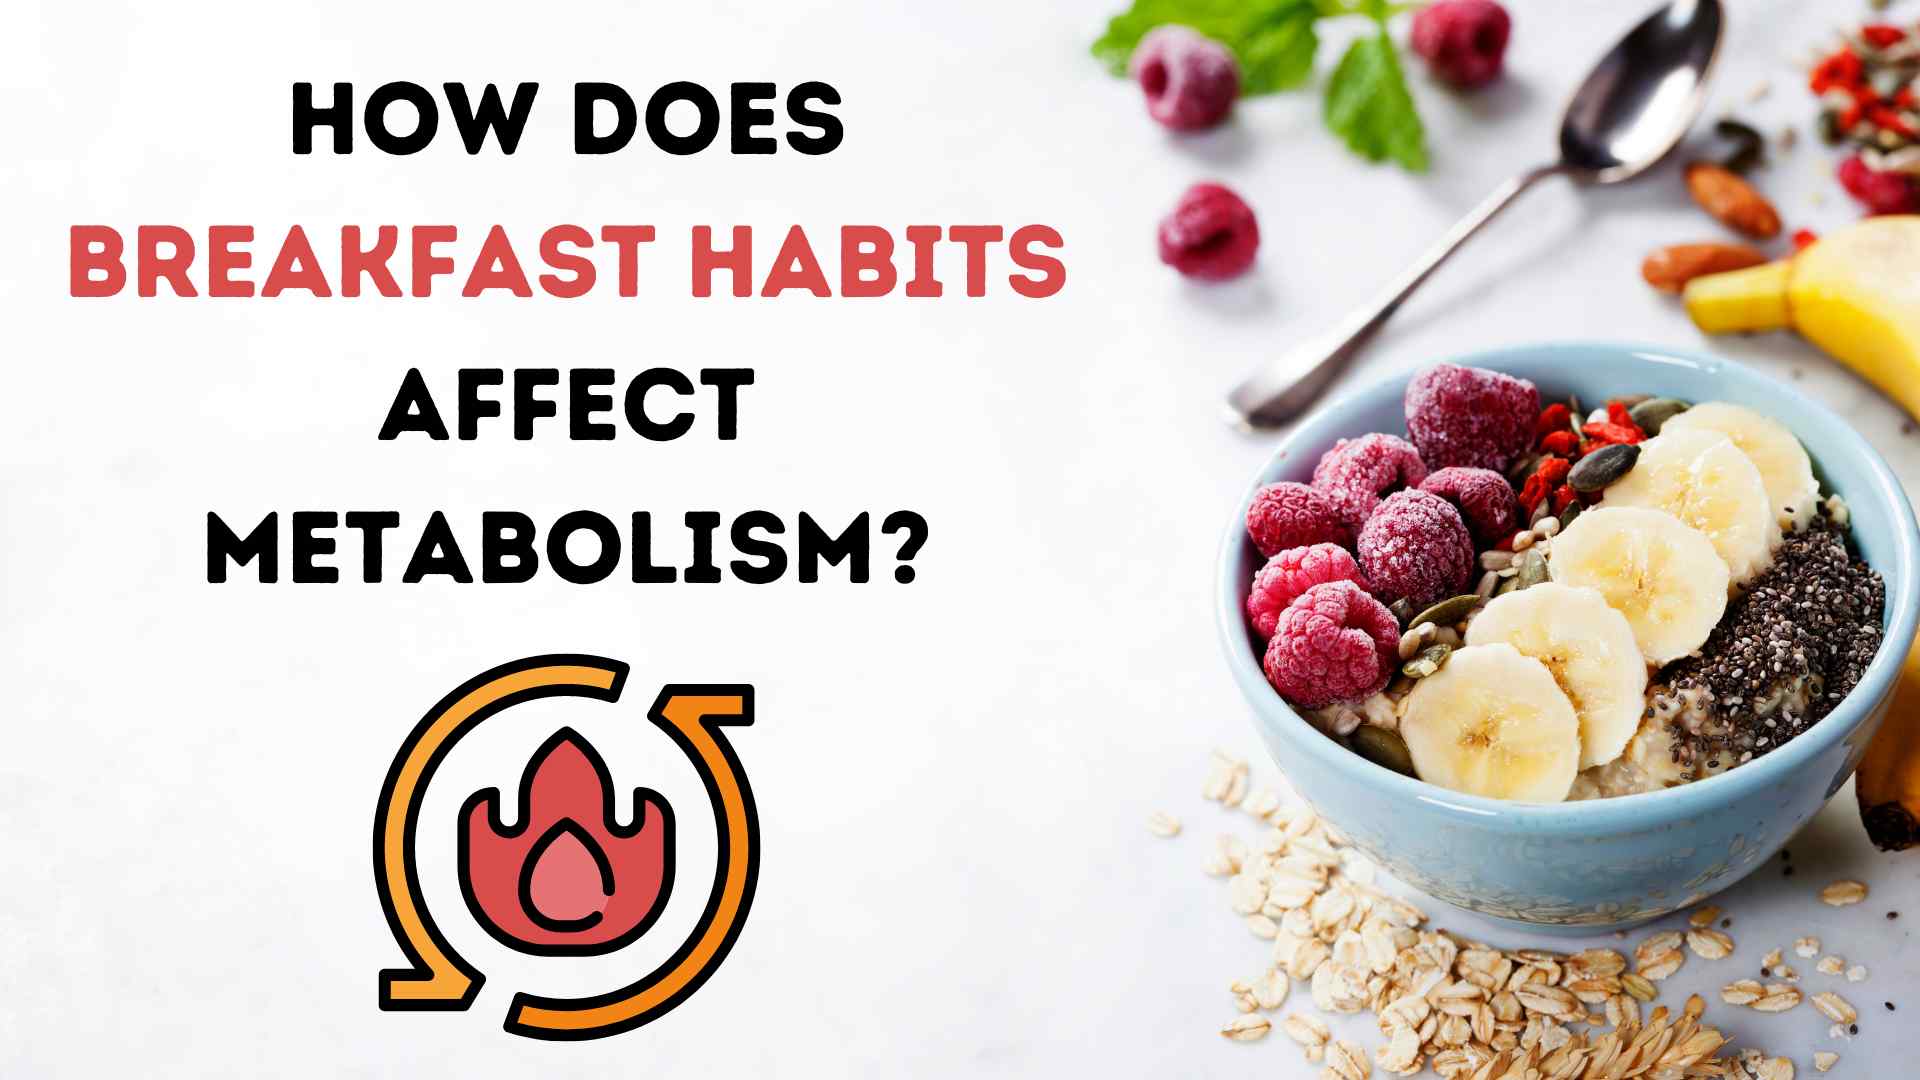 How Does Breakfast Habits Affect Metabolism